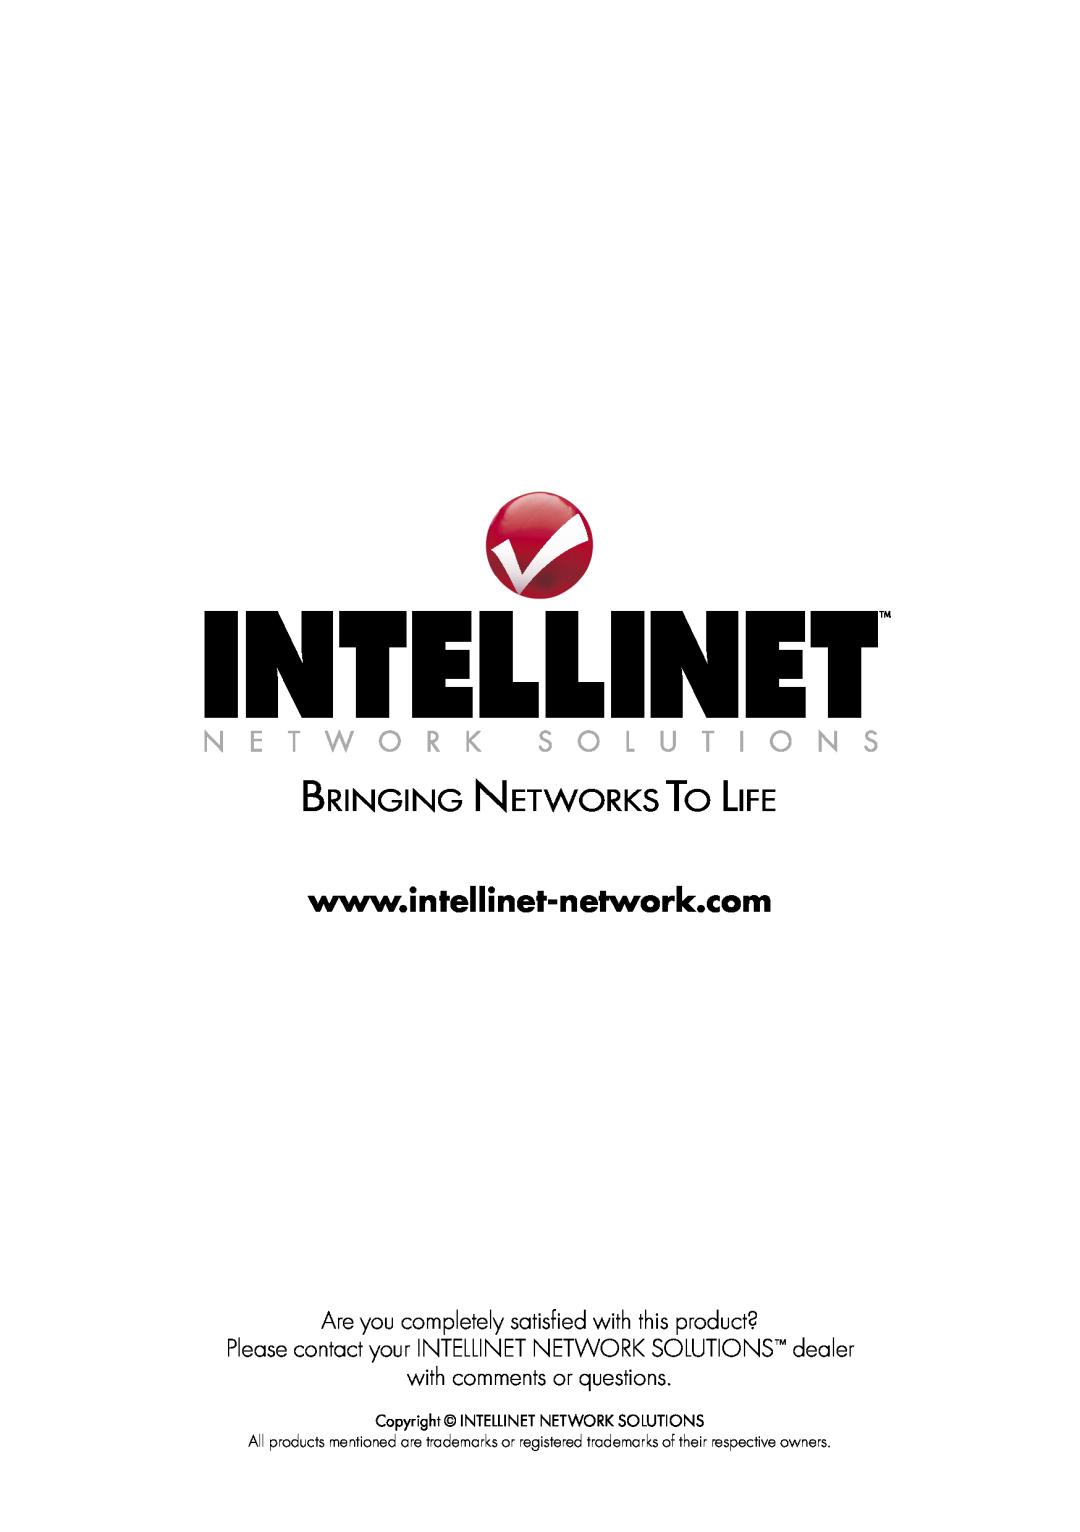 Intellinet Network Solutions 502566 manual Are you completely satisﬁed with this product?, with comments or questions 